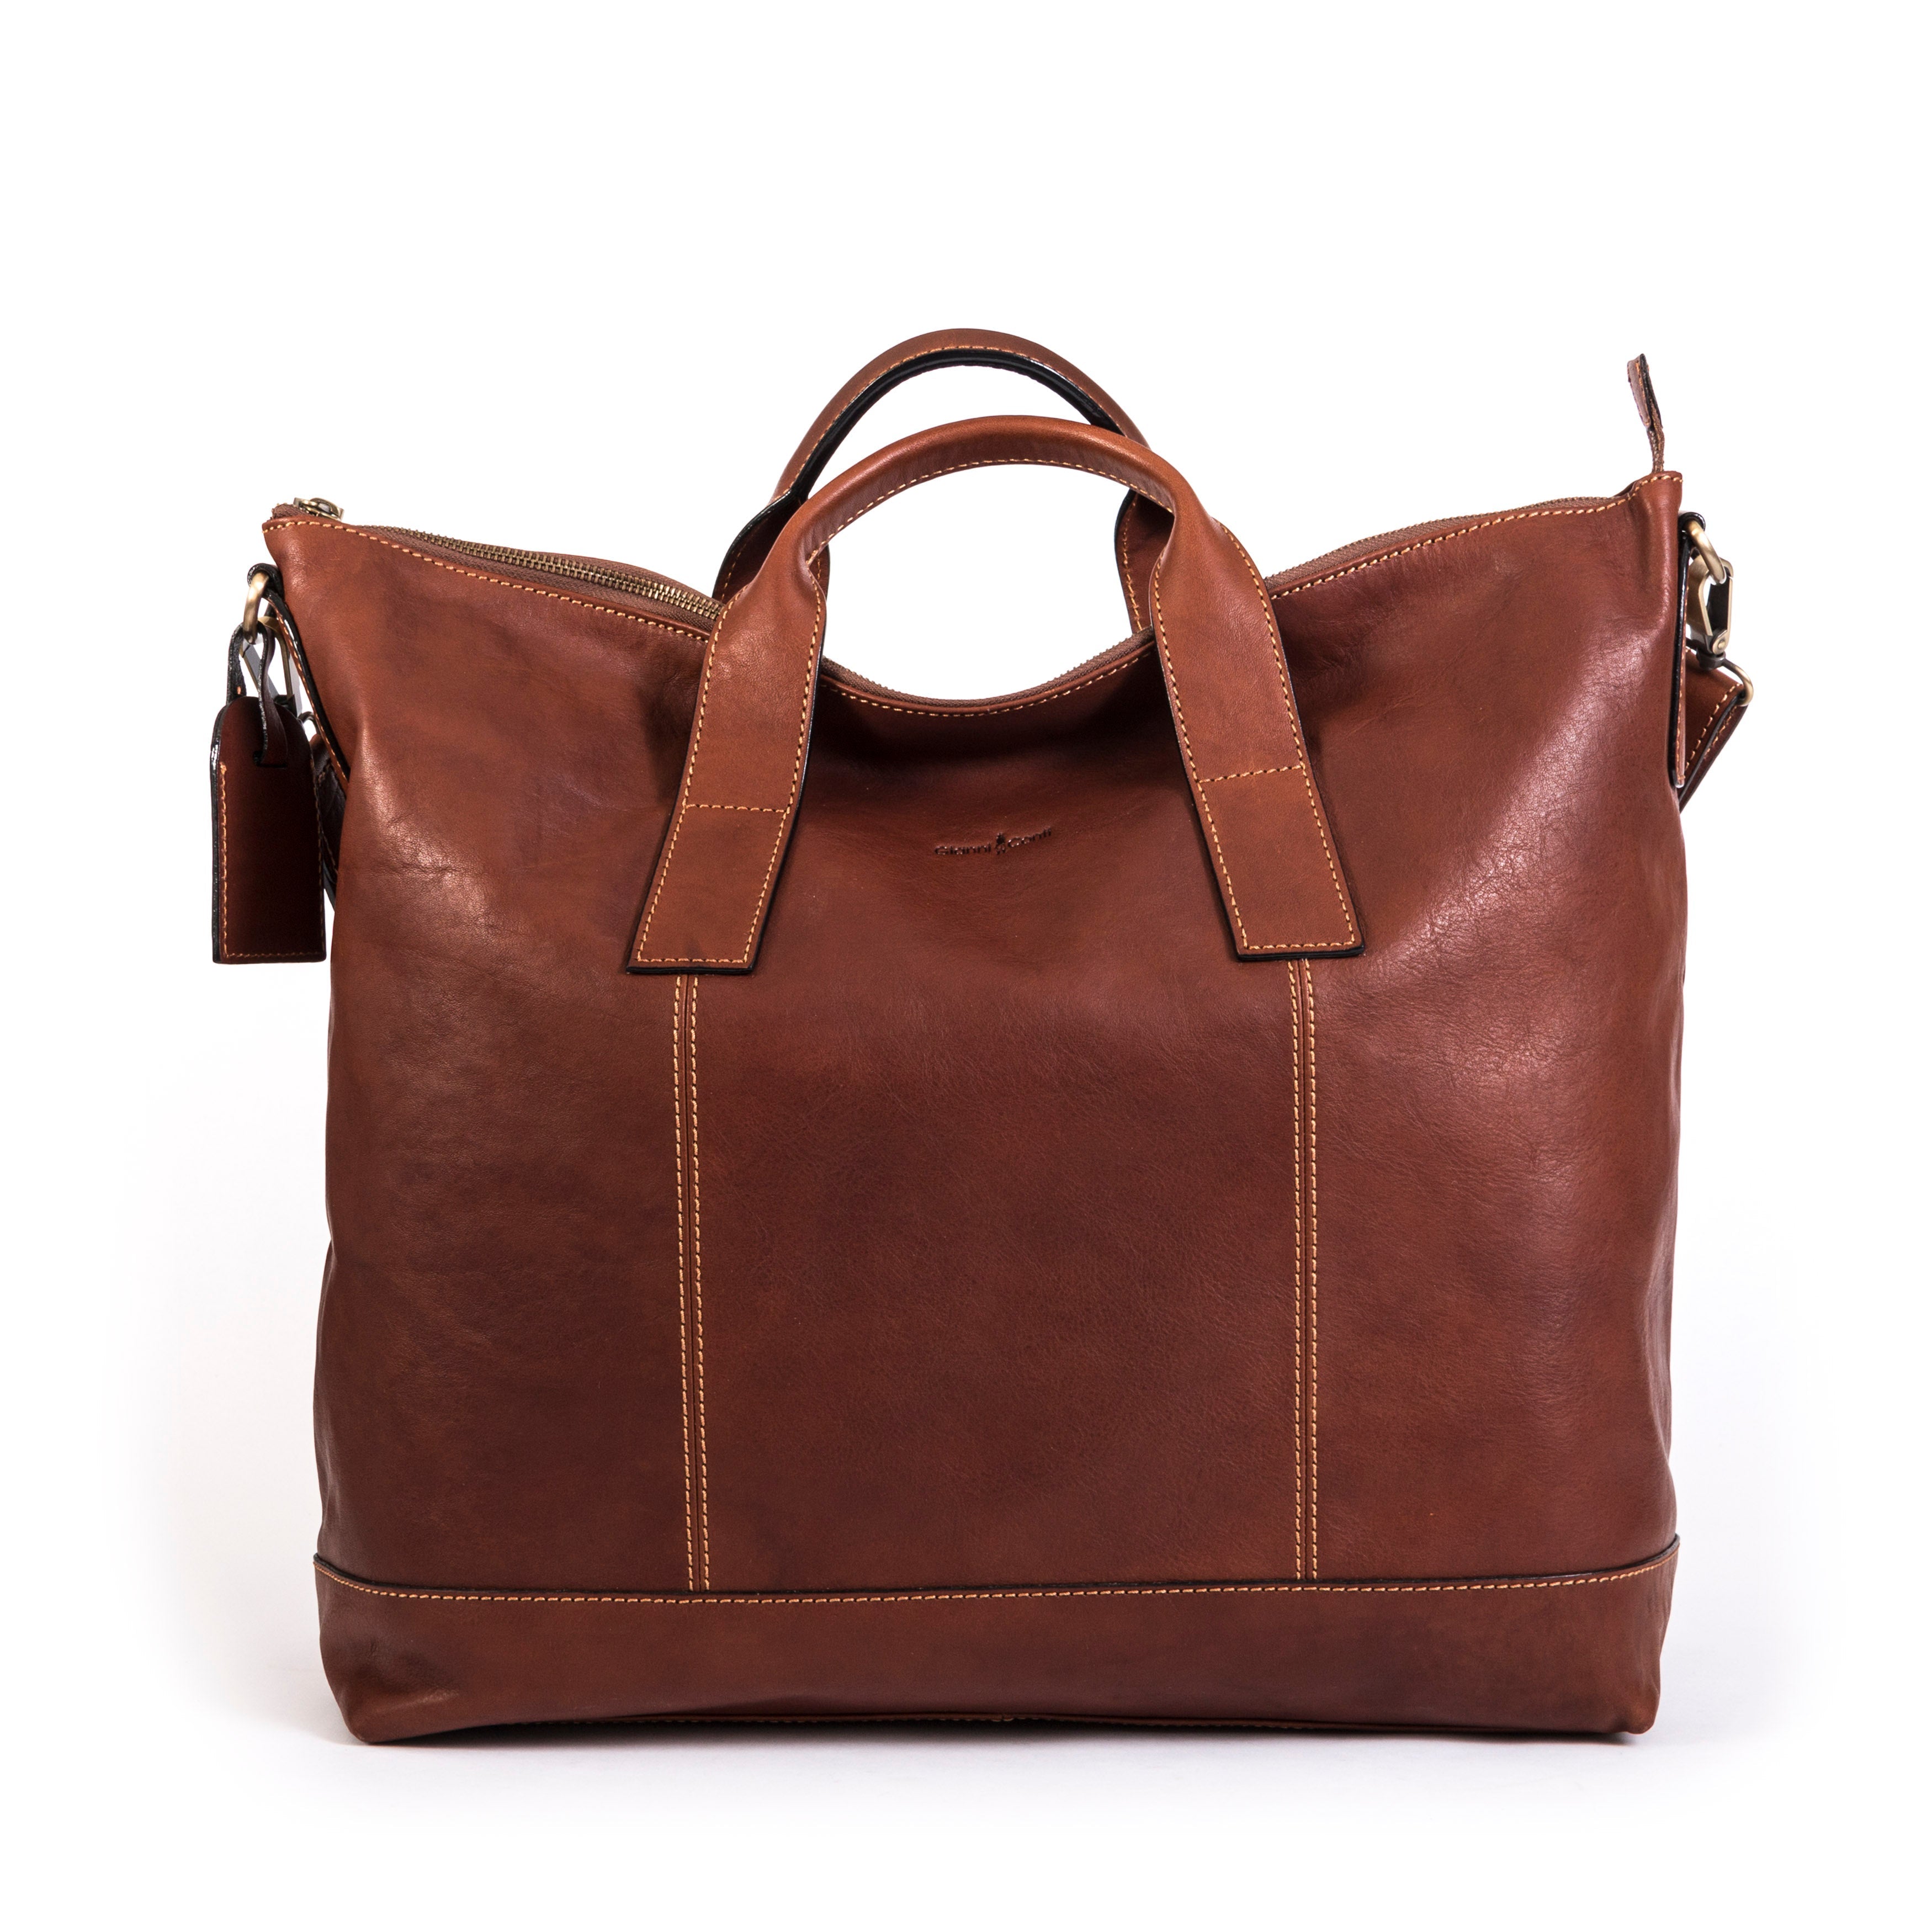 Apollo Travel Bag by Gianni Conti - Vegetable-Tanned Leather